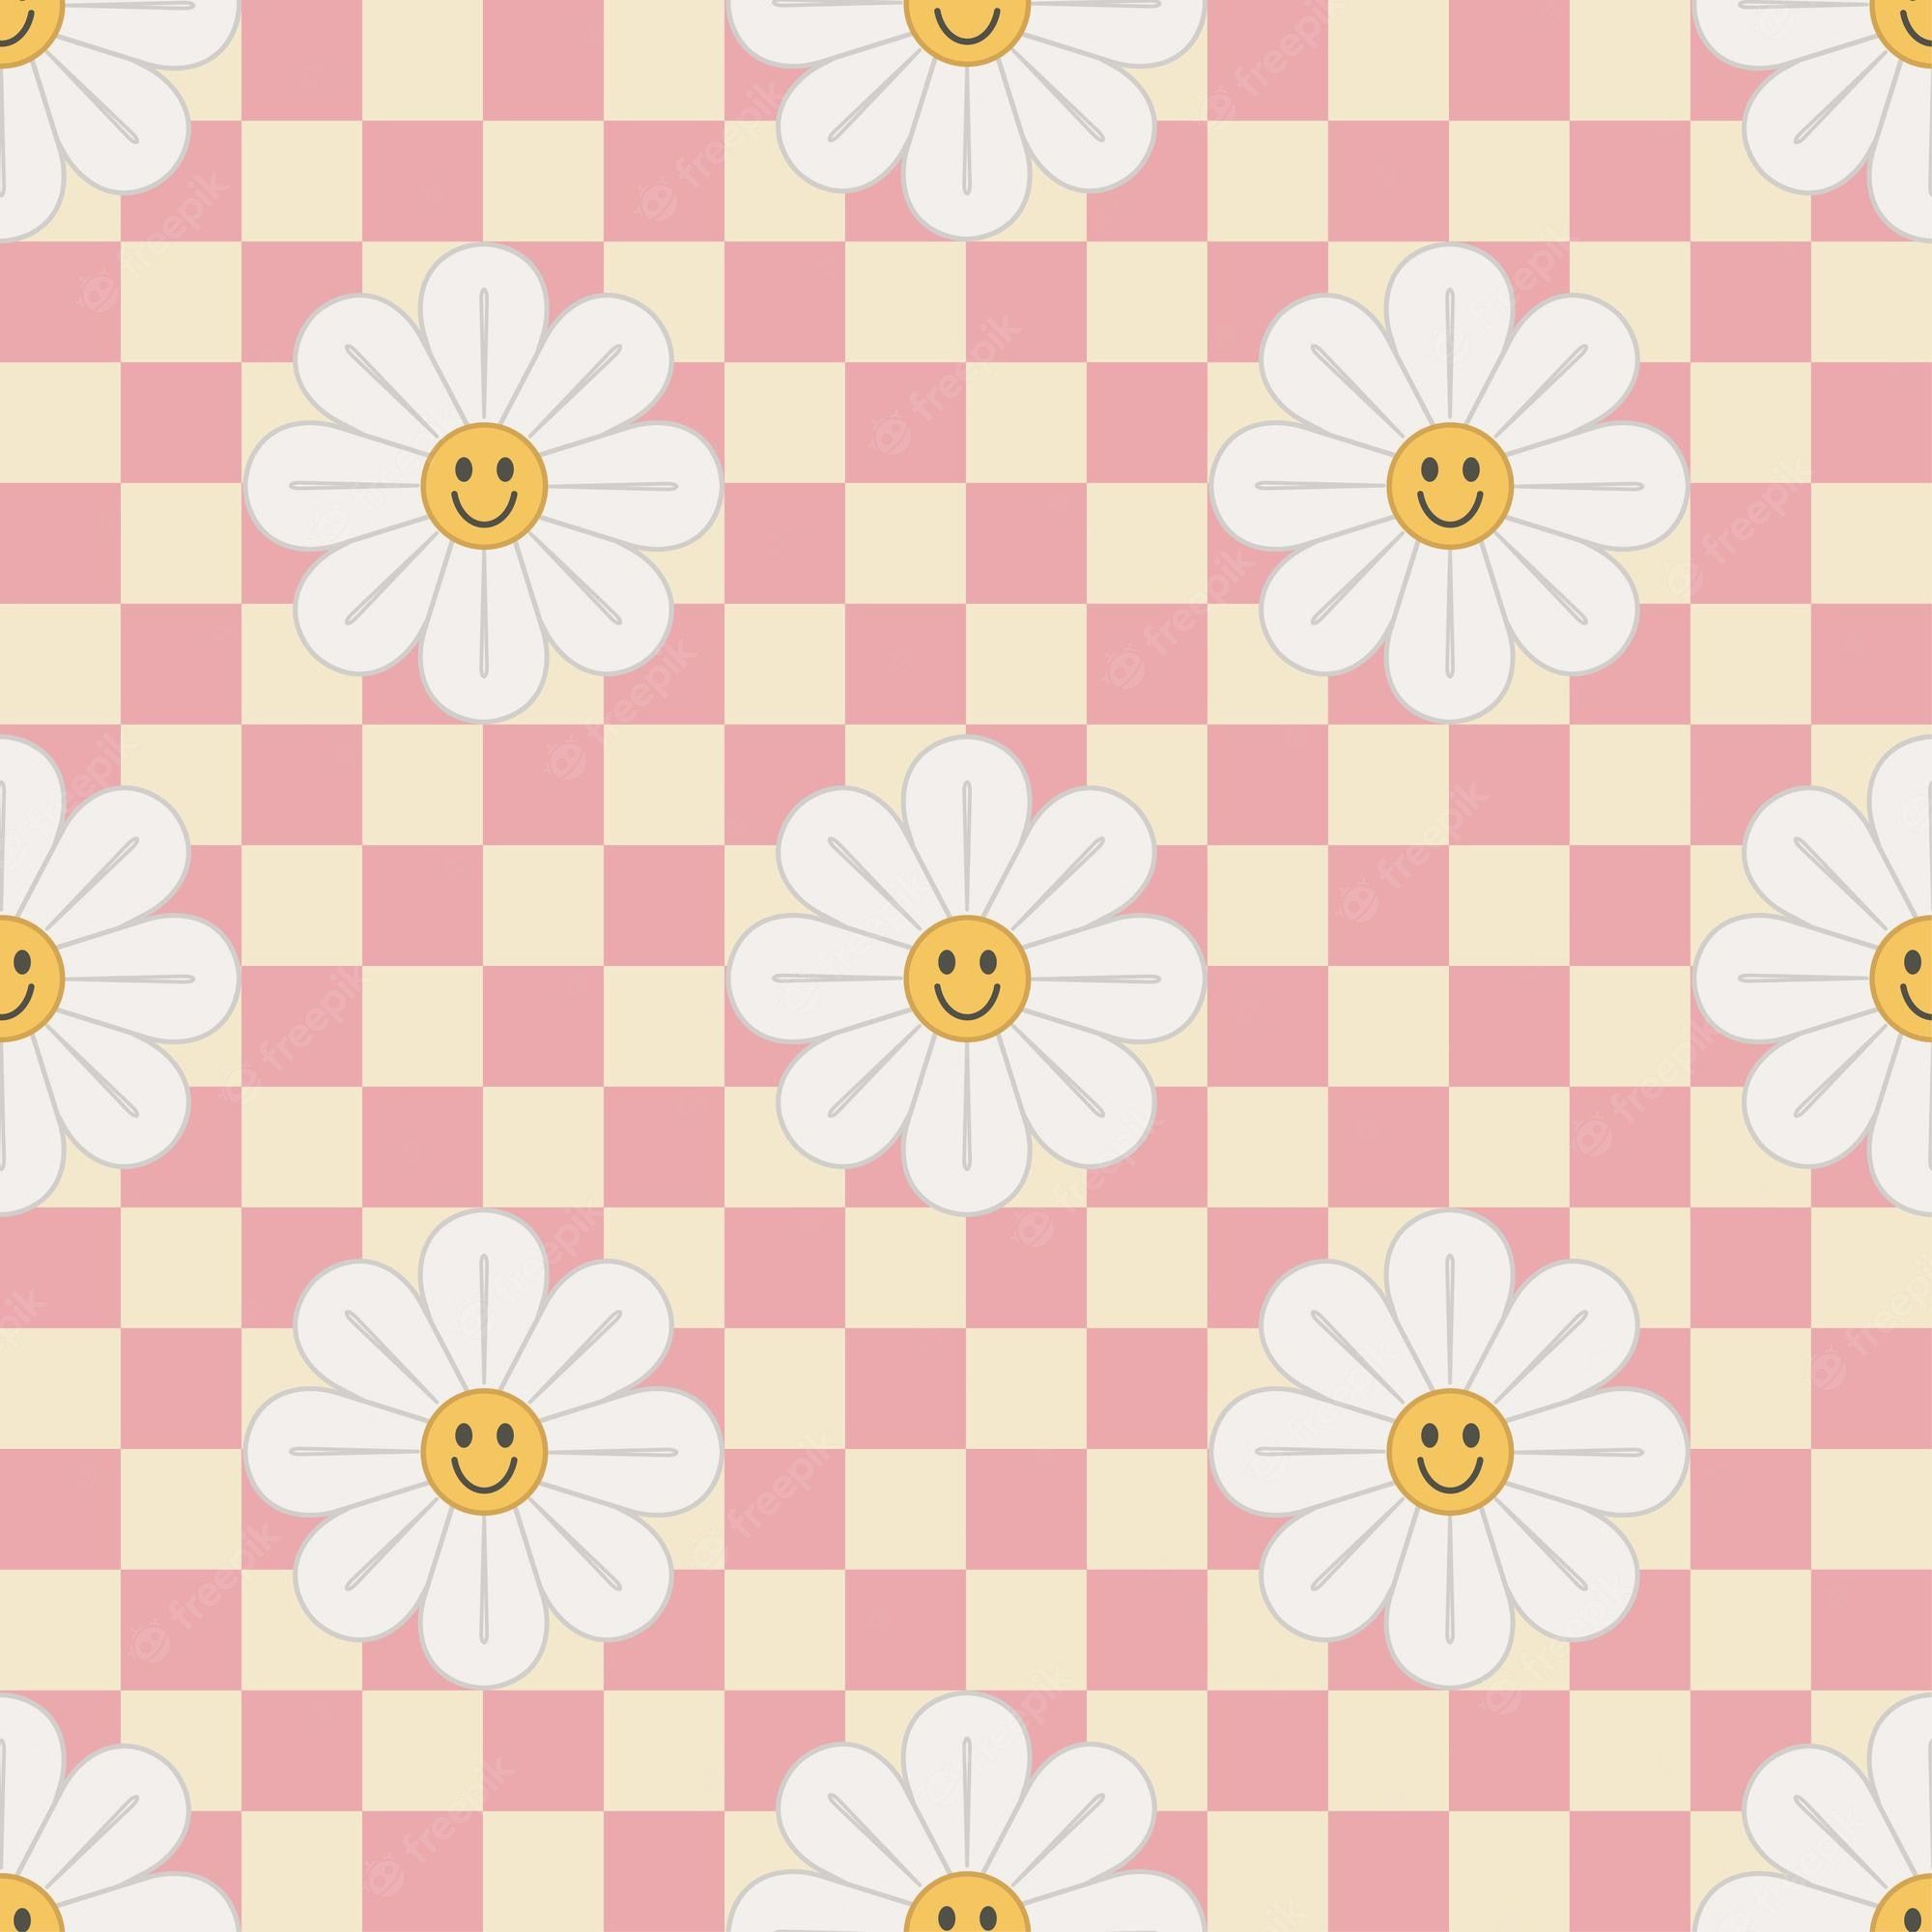 A pattern of white daisies on a pink and yellow checkered background - 70s